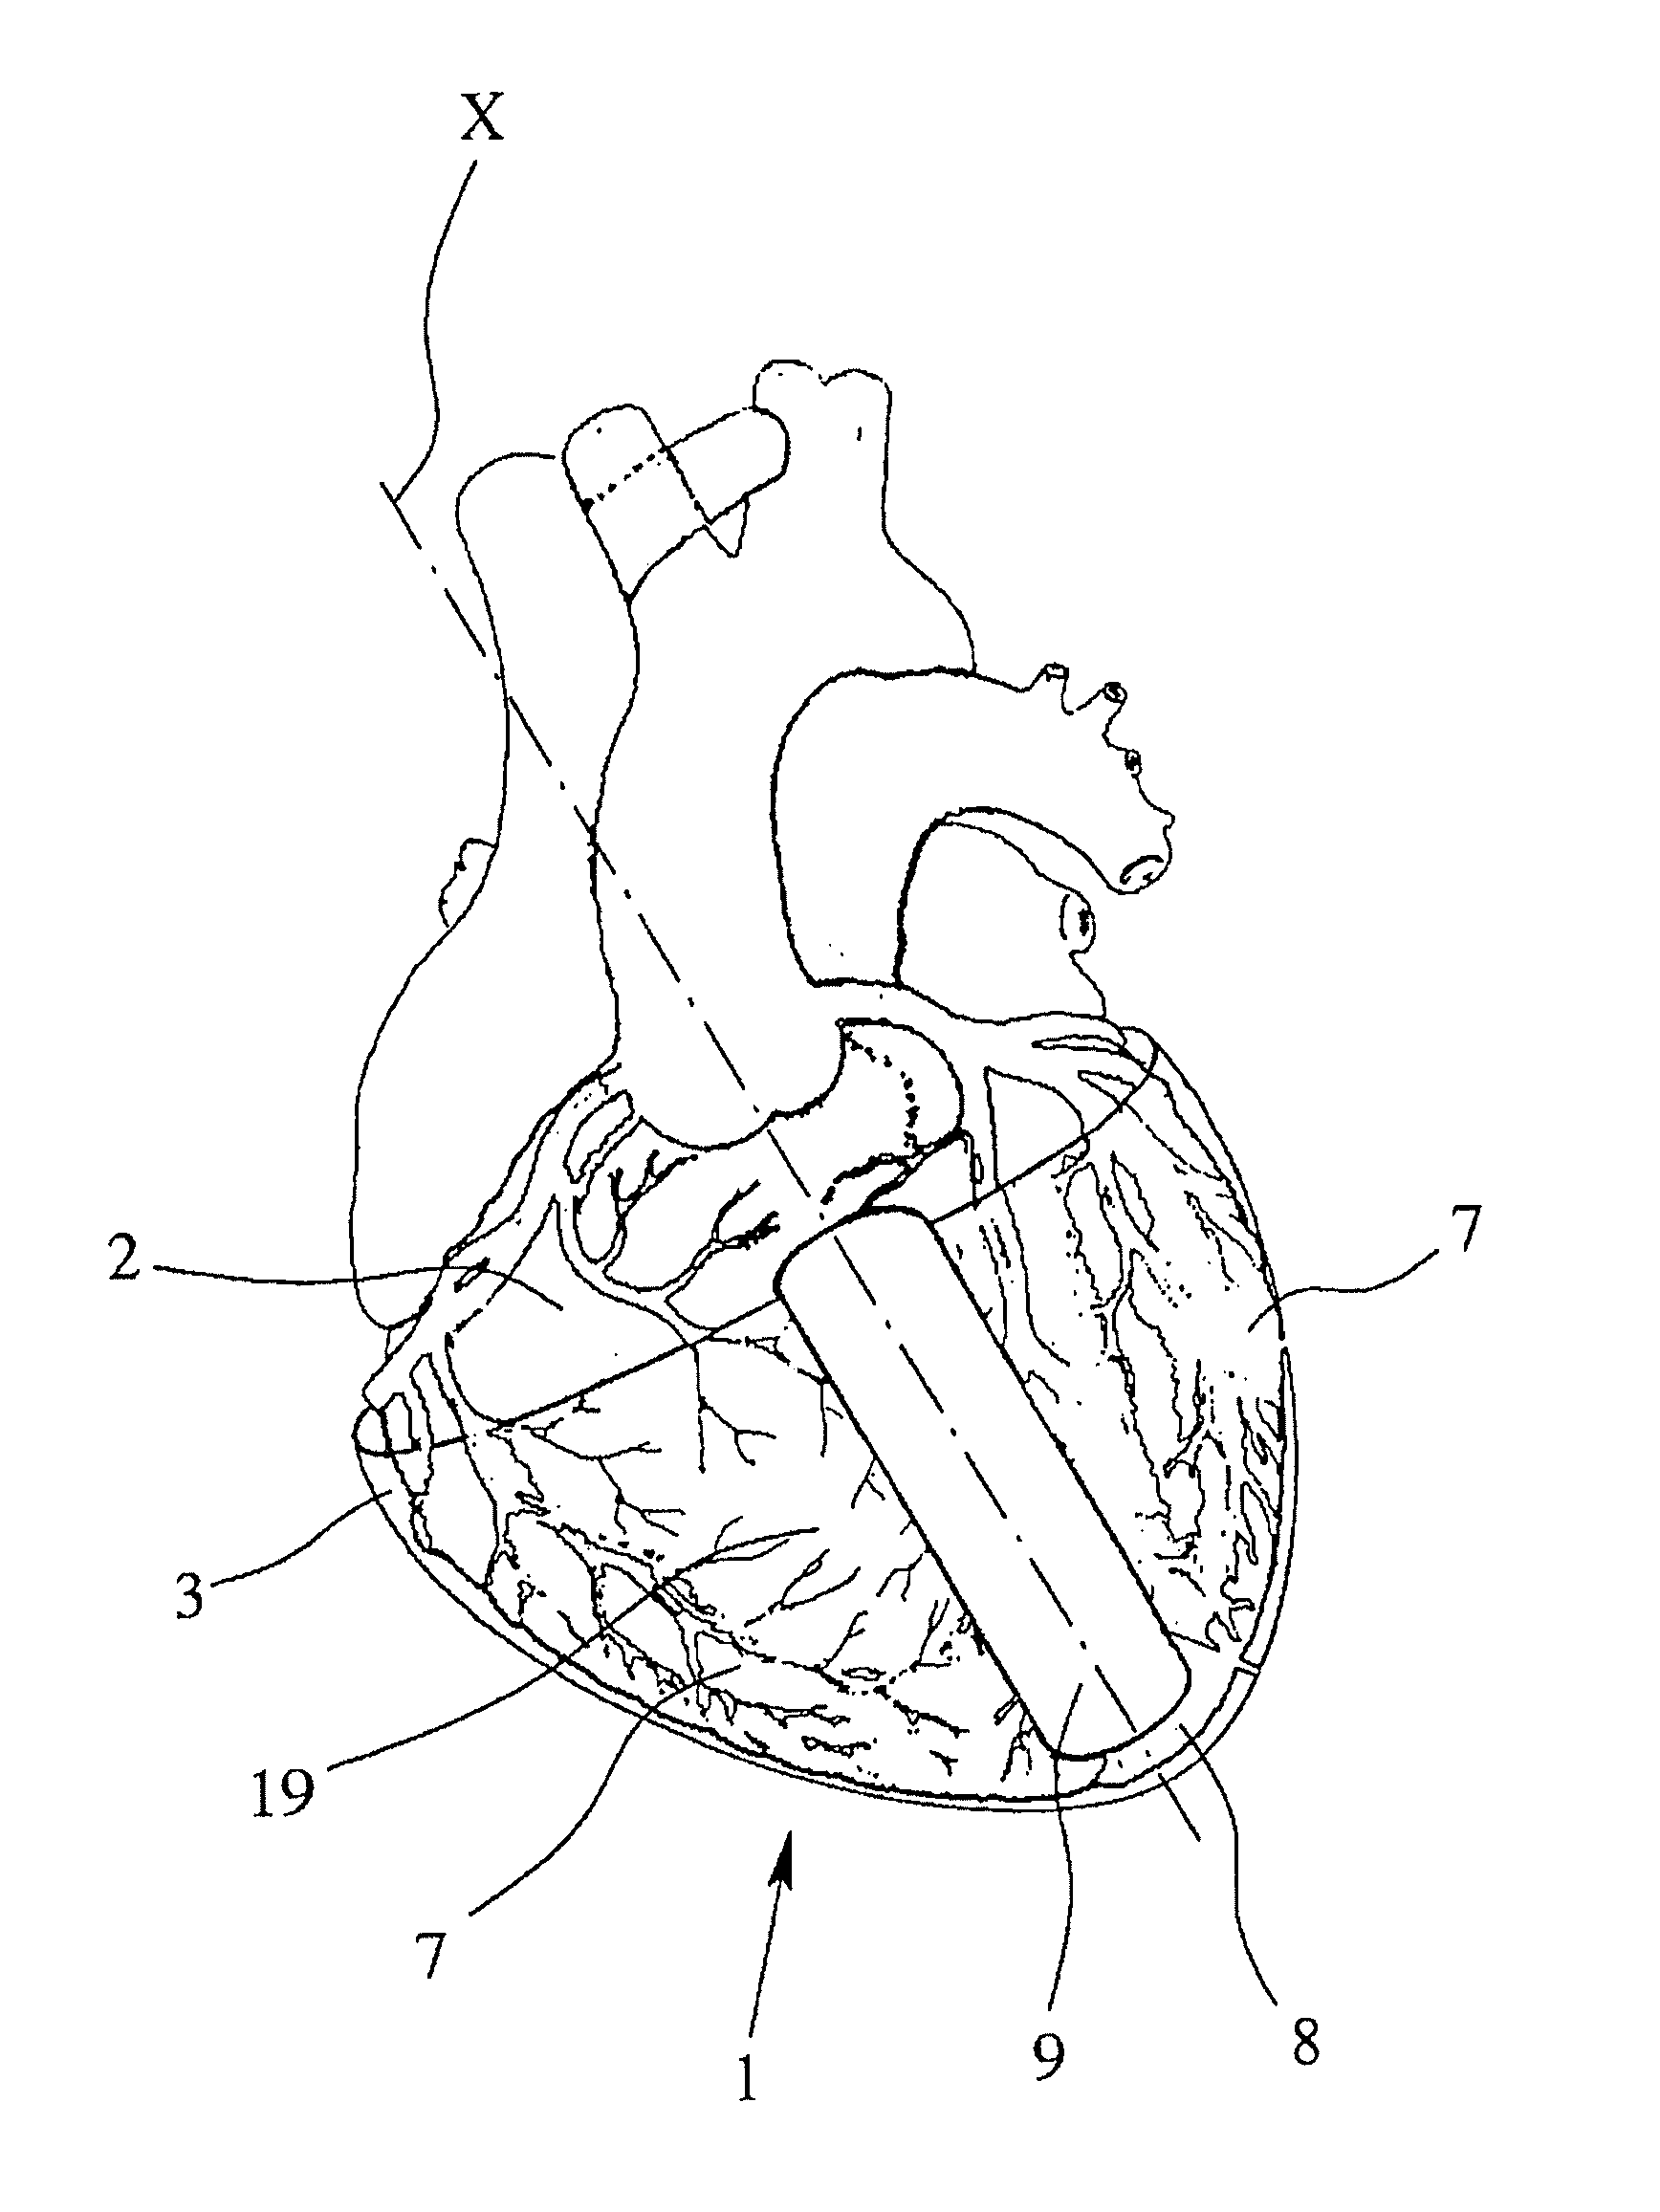 Device and system for assisting and/or taking over the pumping function of the heart